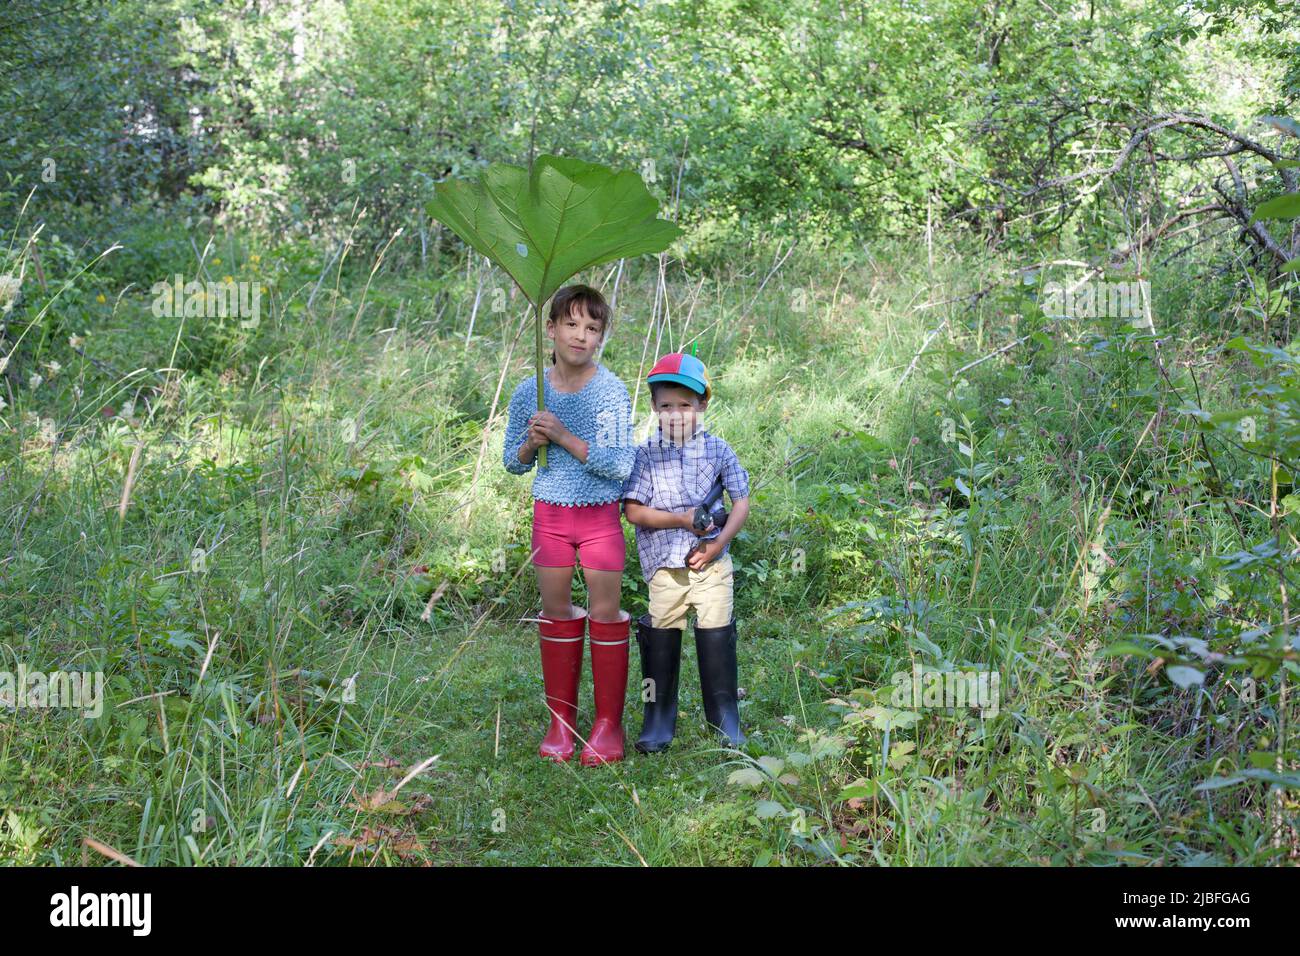 Boy and girl with large leaf in forest Stock Photo